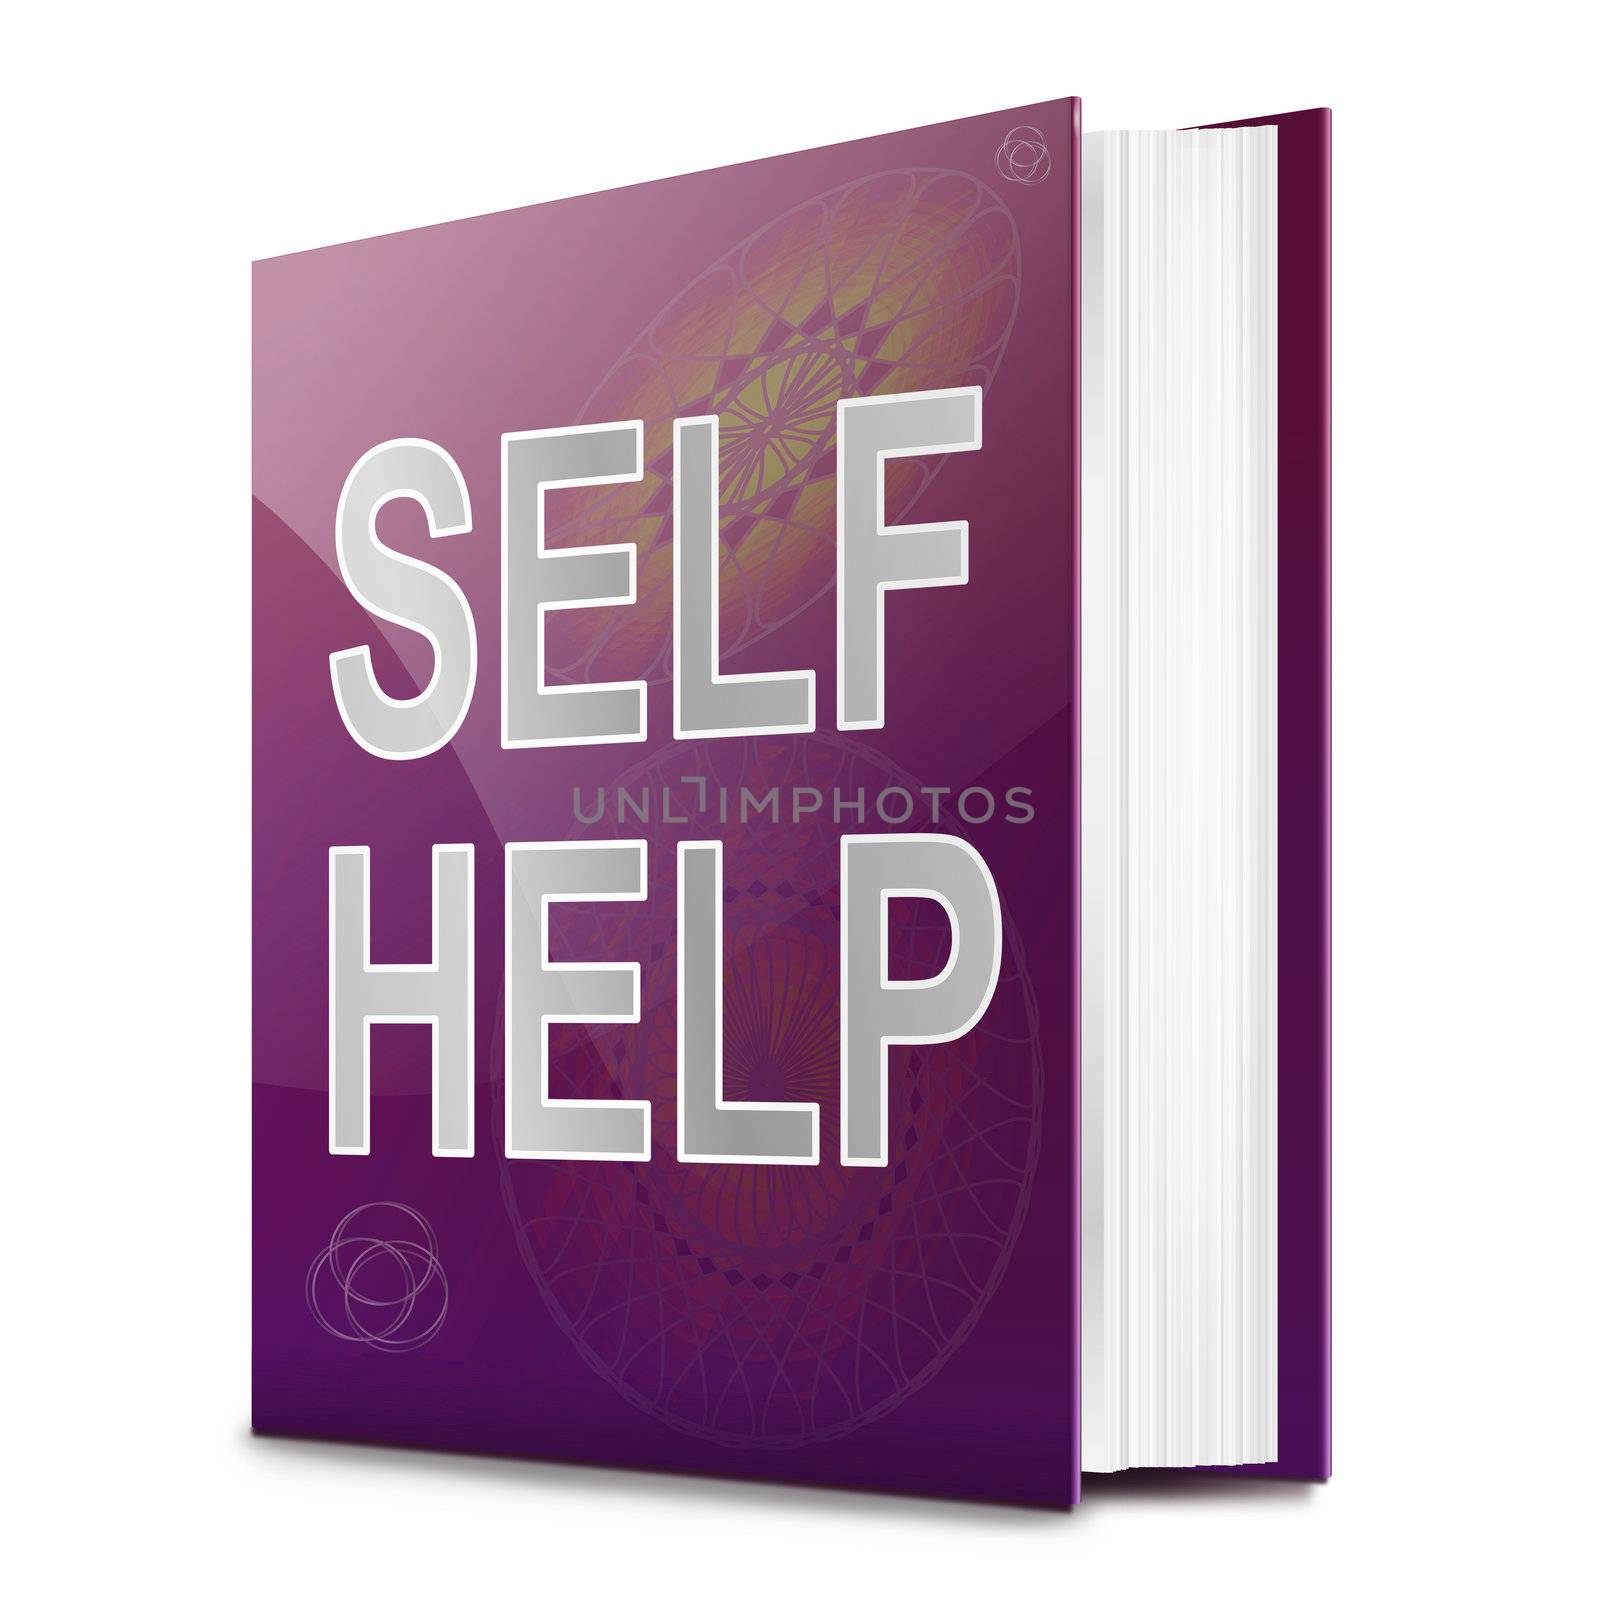 Self help concept book. by 72soul